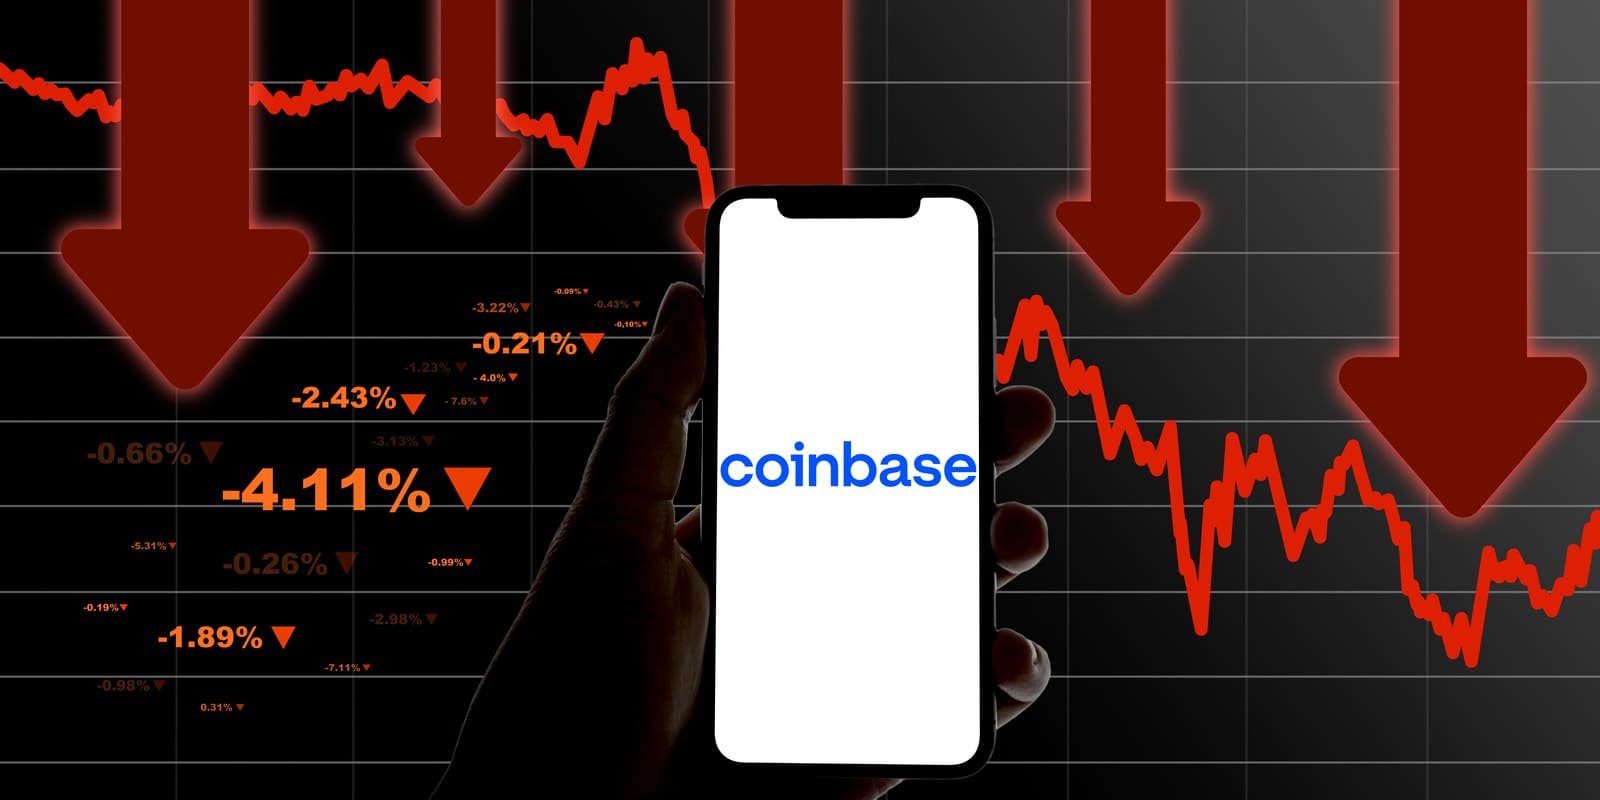 Coinbase forced to cut 950 employees